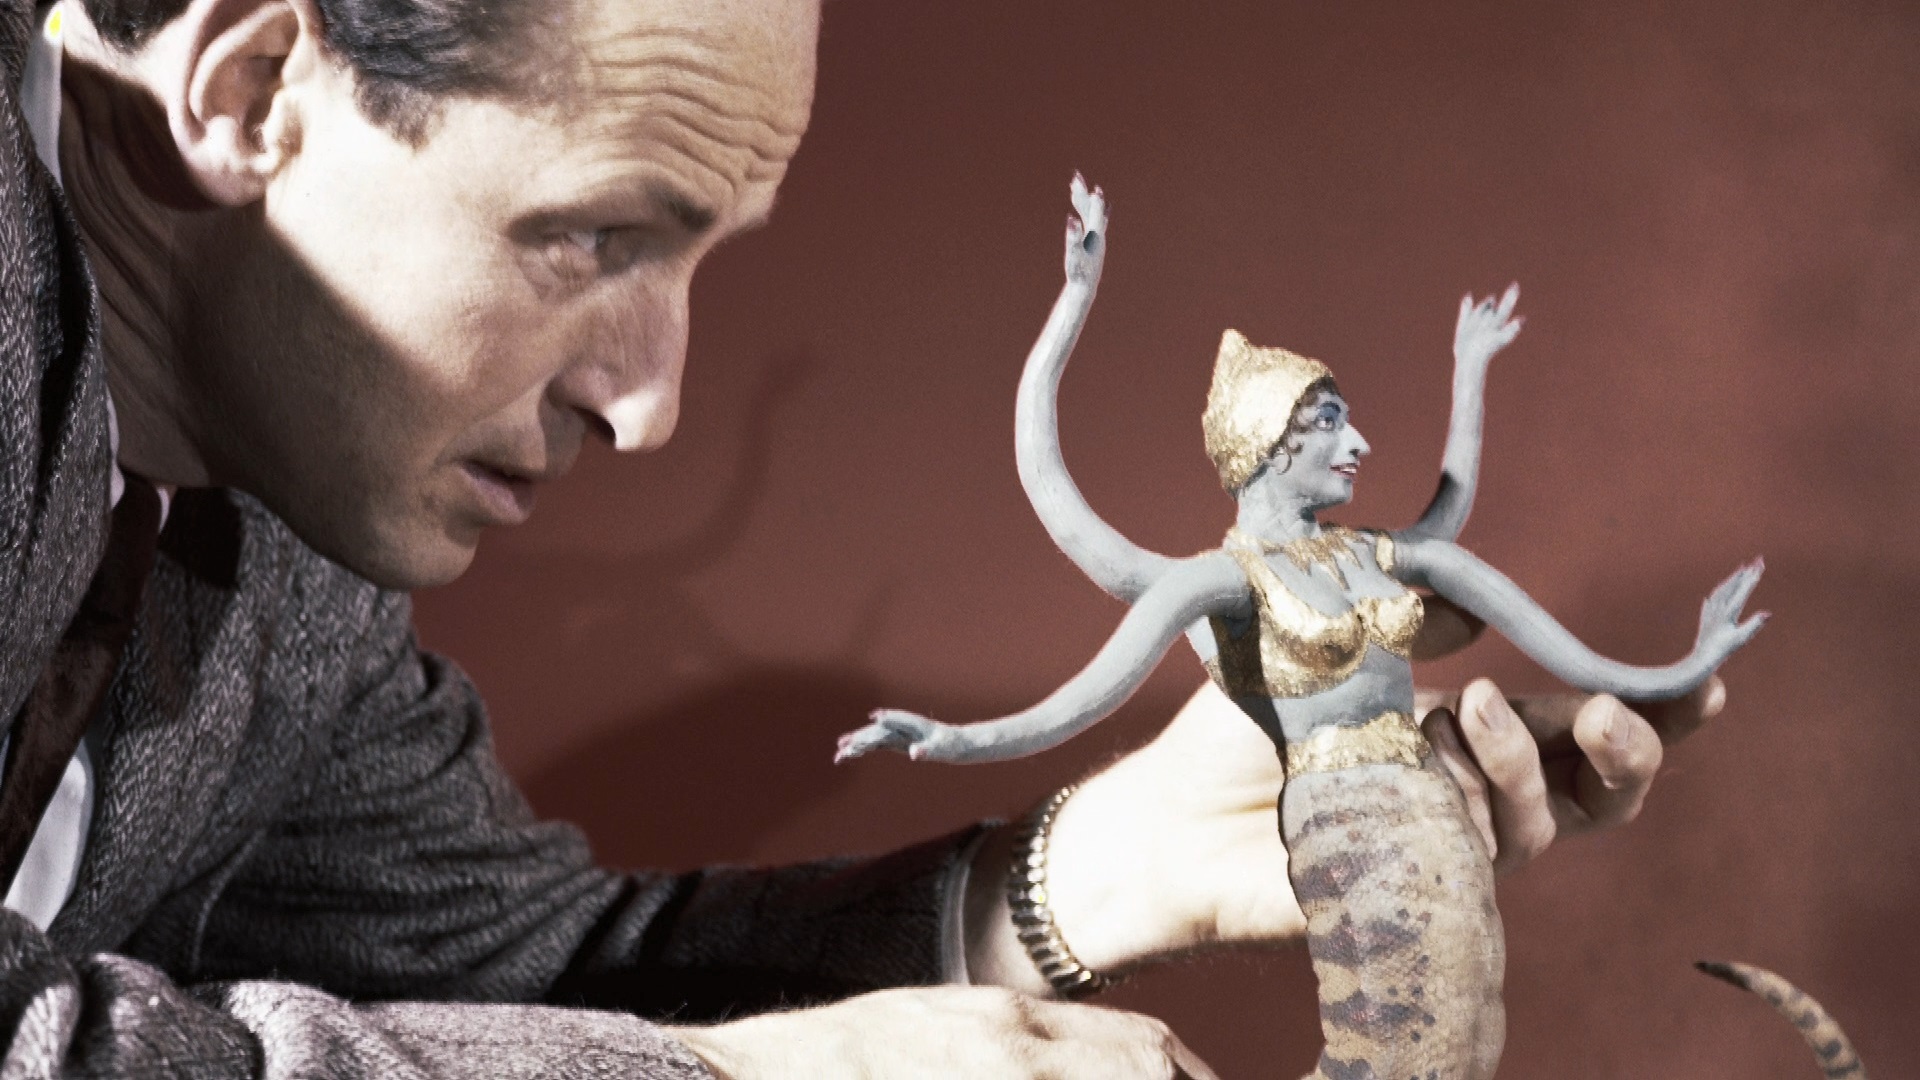 Ray Harryhausen: Special Effects Titan (Blu-ray) : DVD Talk Review of the Blu-ray1920 x 1080